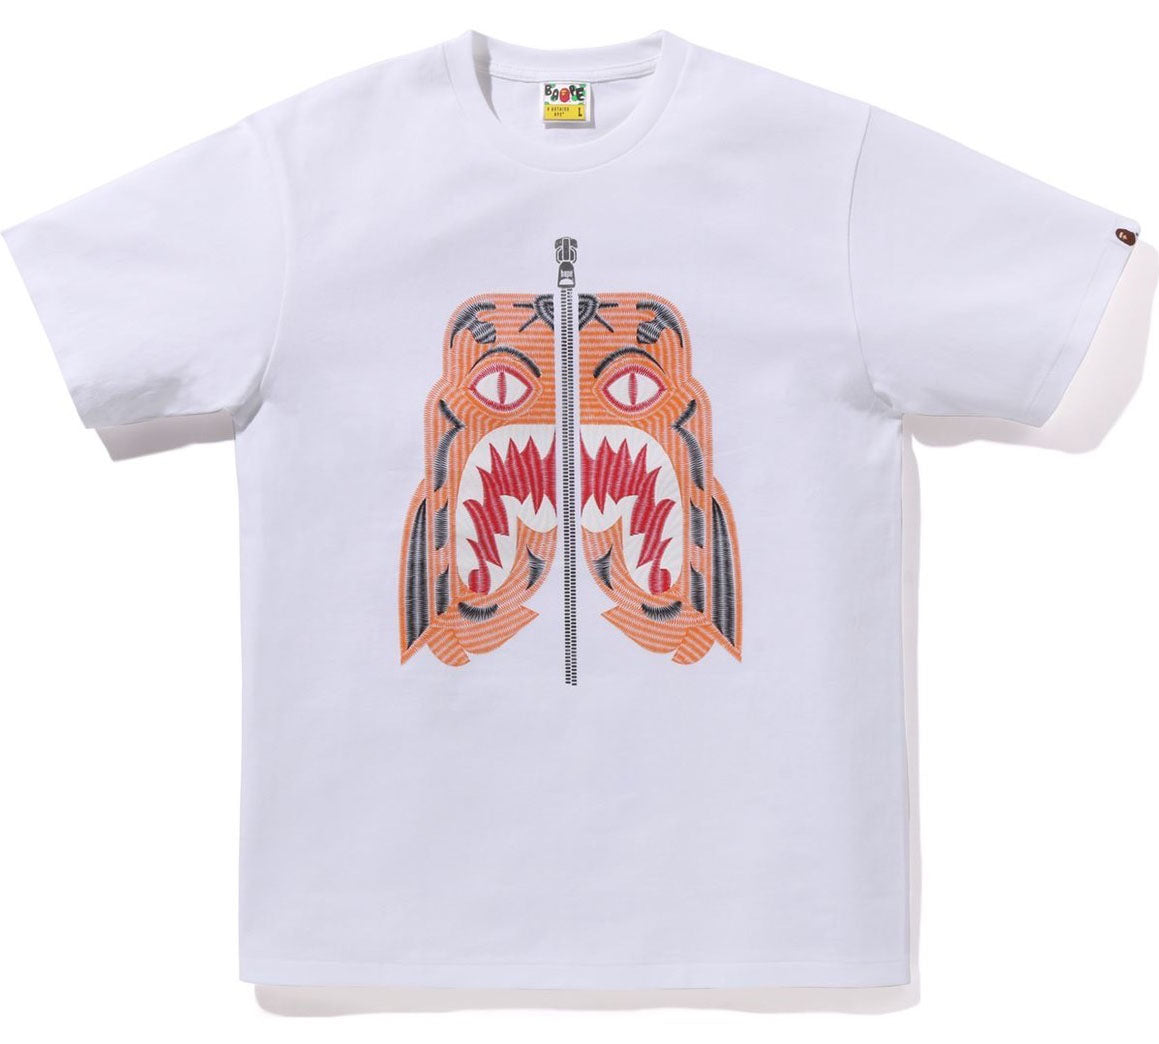 A BATHING APE EMBROIDERY STYLE TIGER TEE